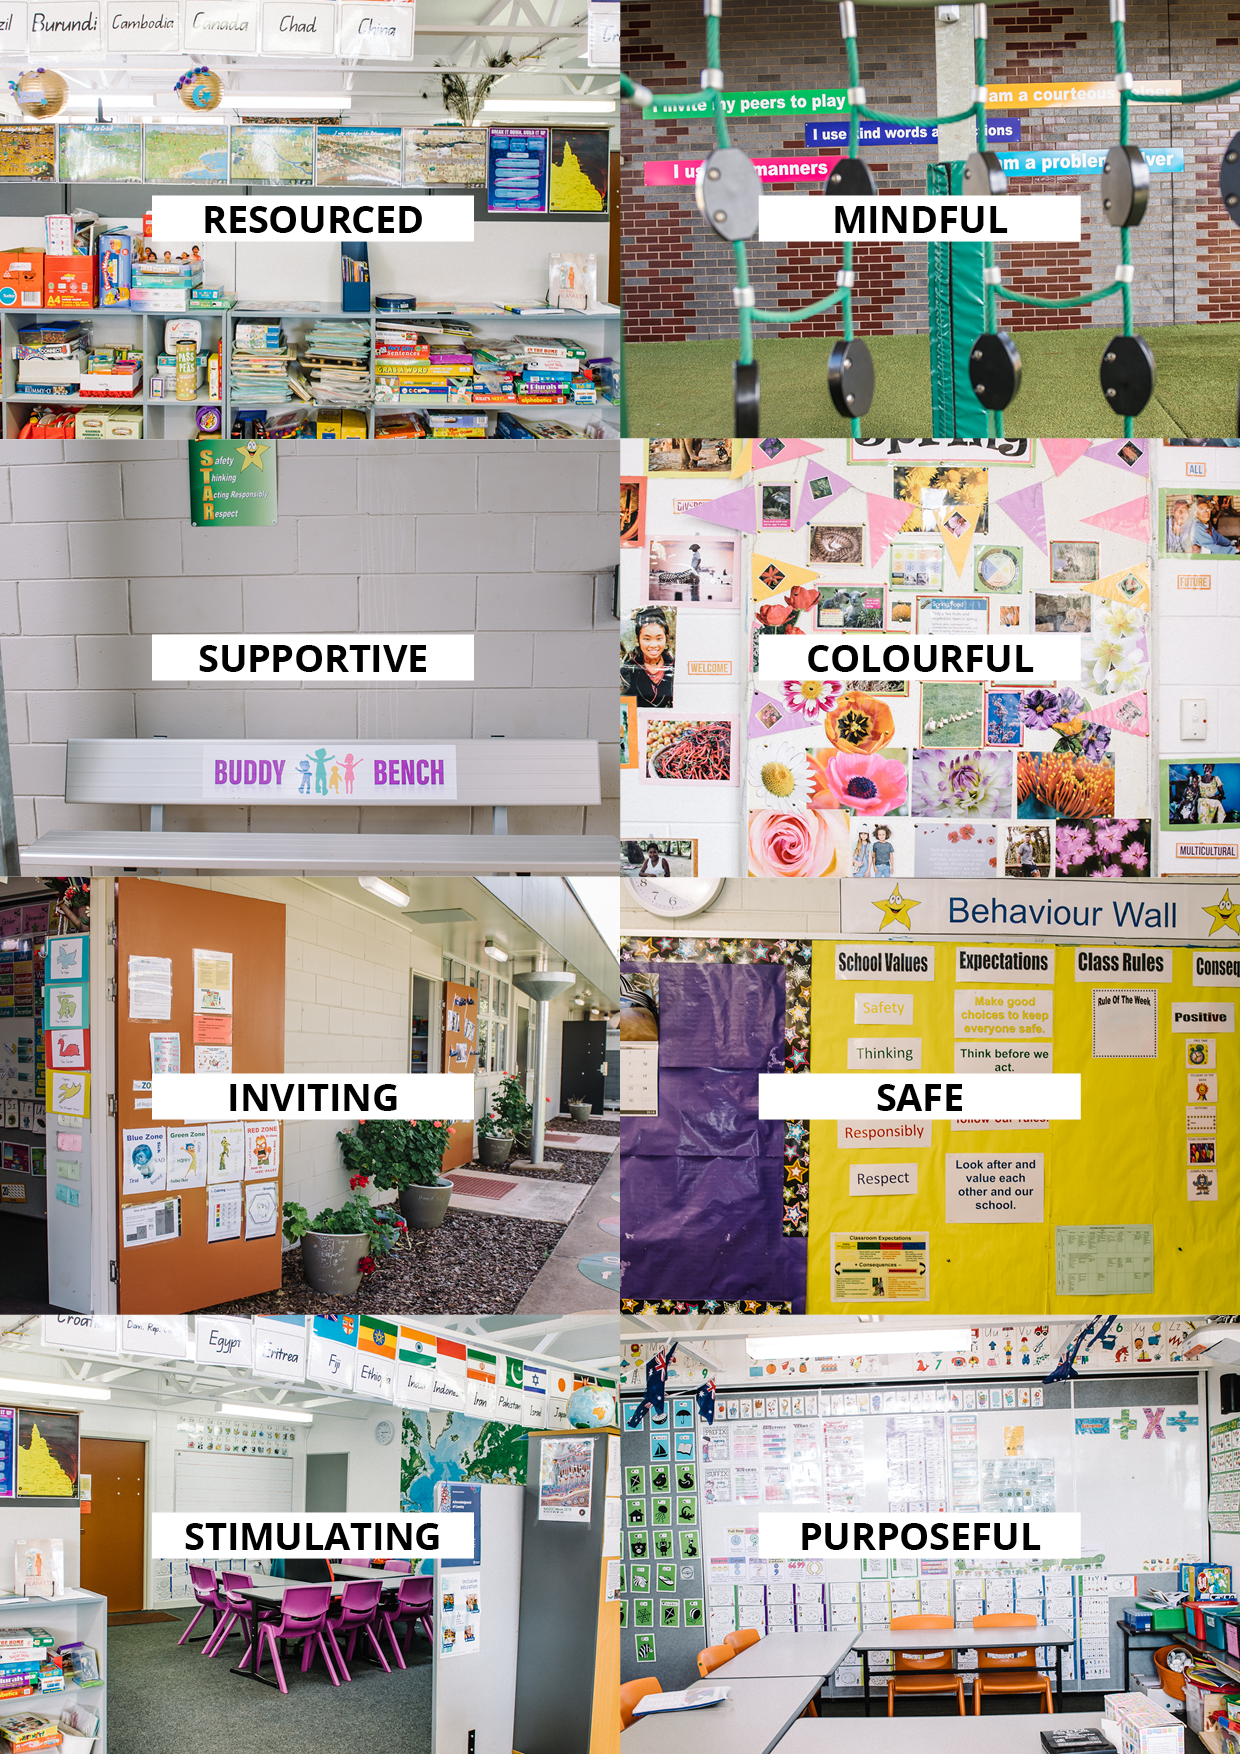 Personal photos of classrooms and student activities